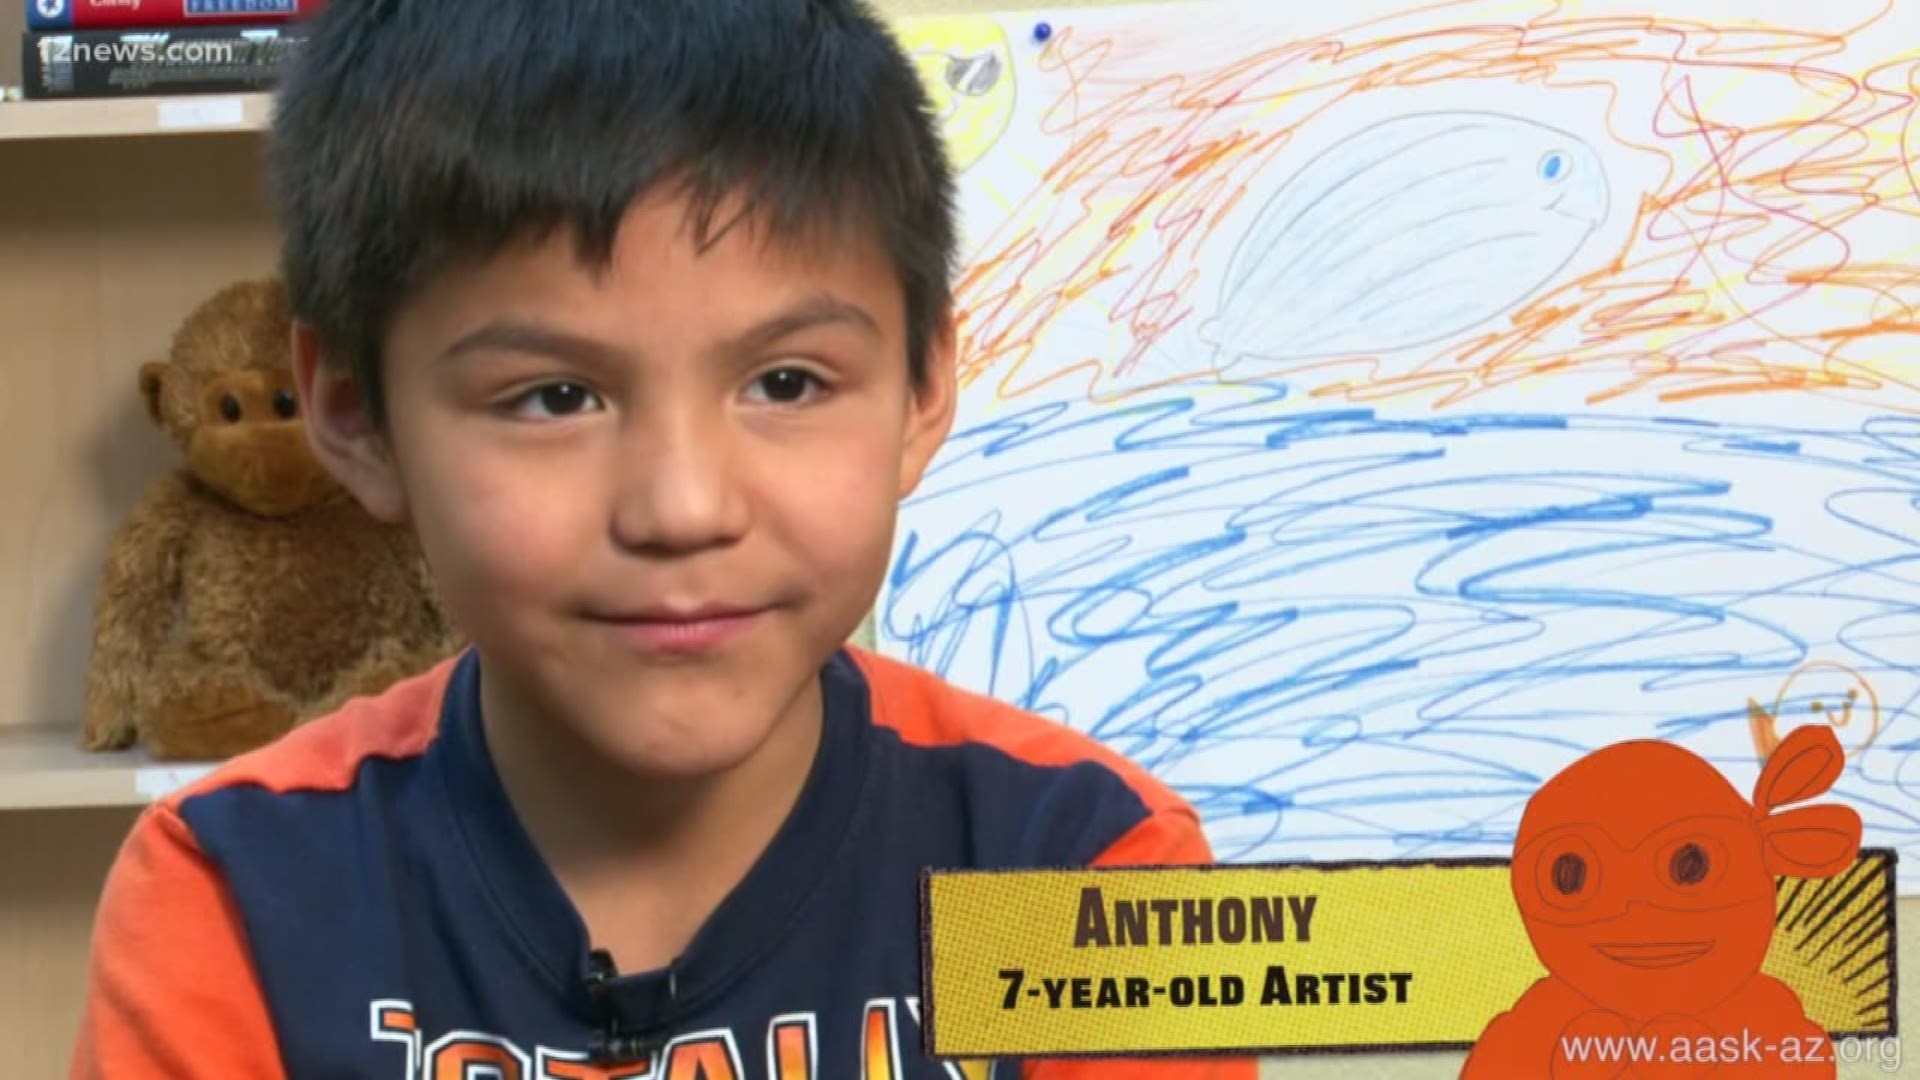 This 7-year-old creative who loves the outdoors aspires to be an artist and is in need of a forever family.